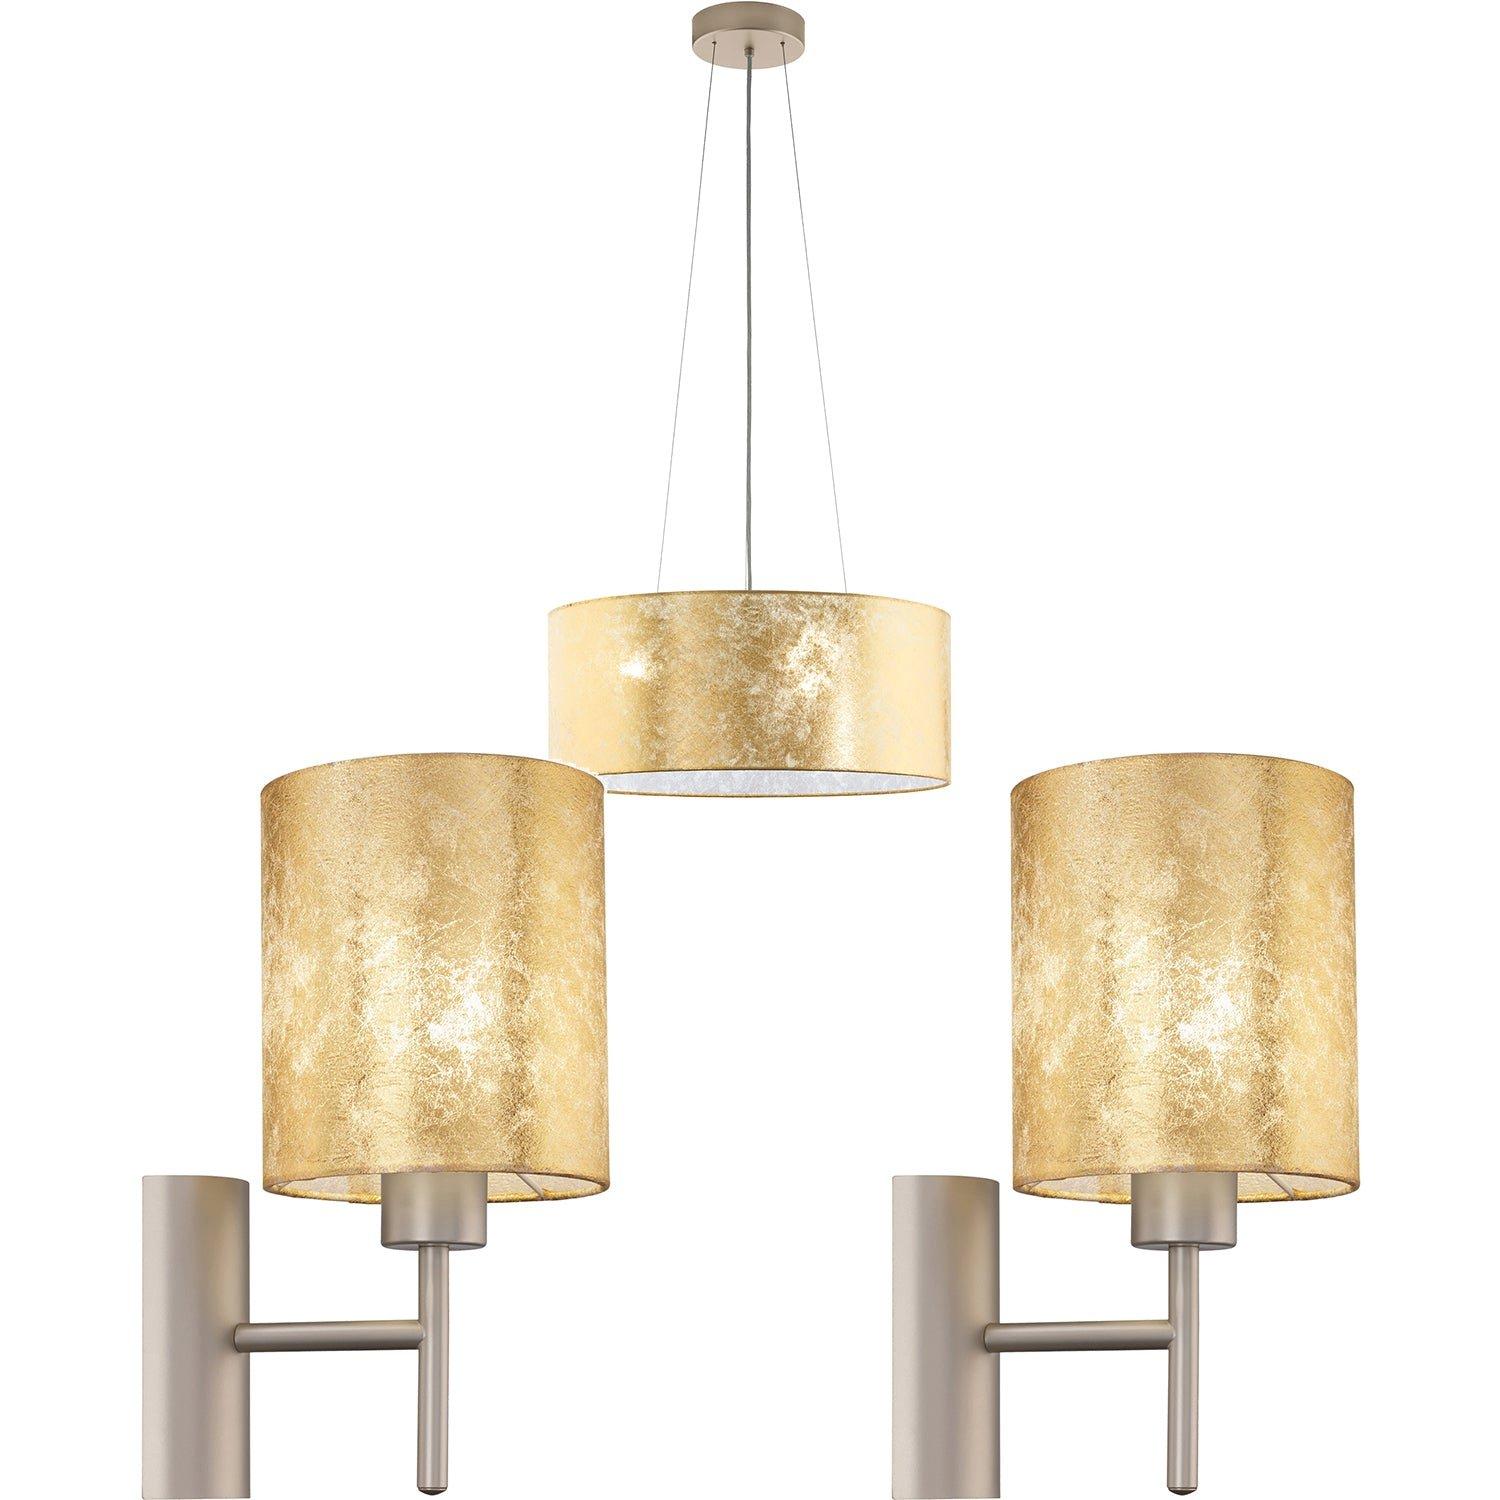 Ceiling Pendant Light & 2x Matching Wall Lights Champagne & Gold Fabric Shade